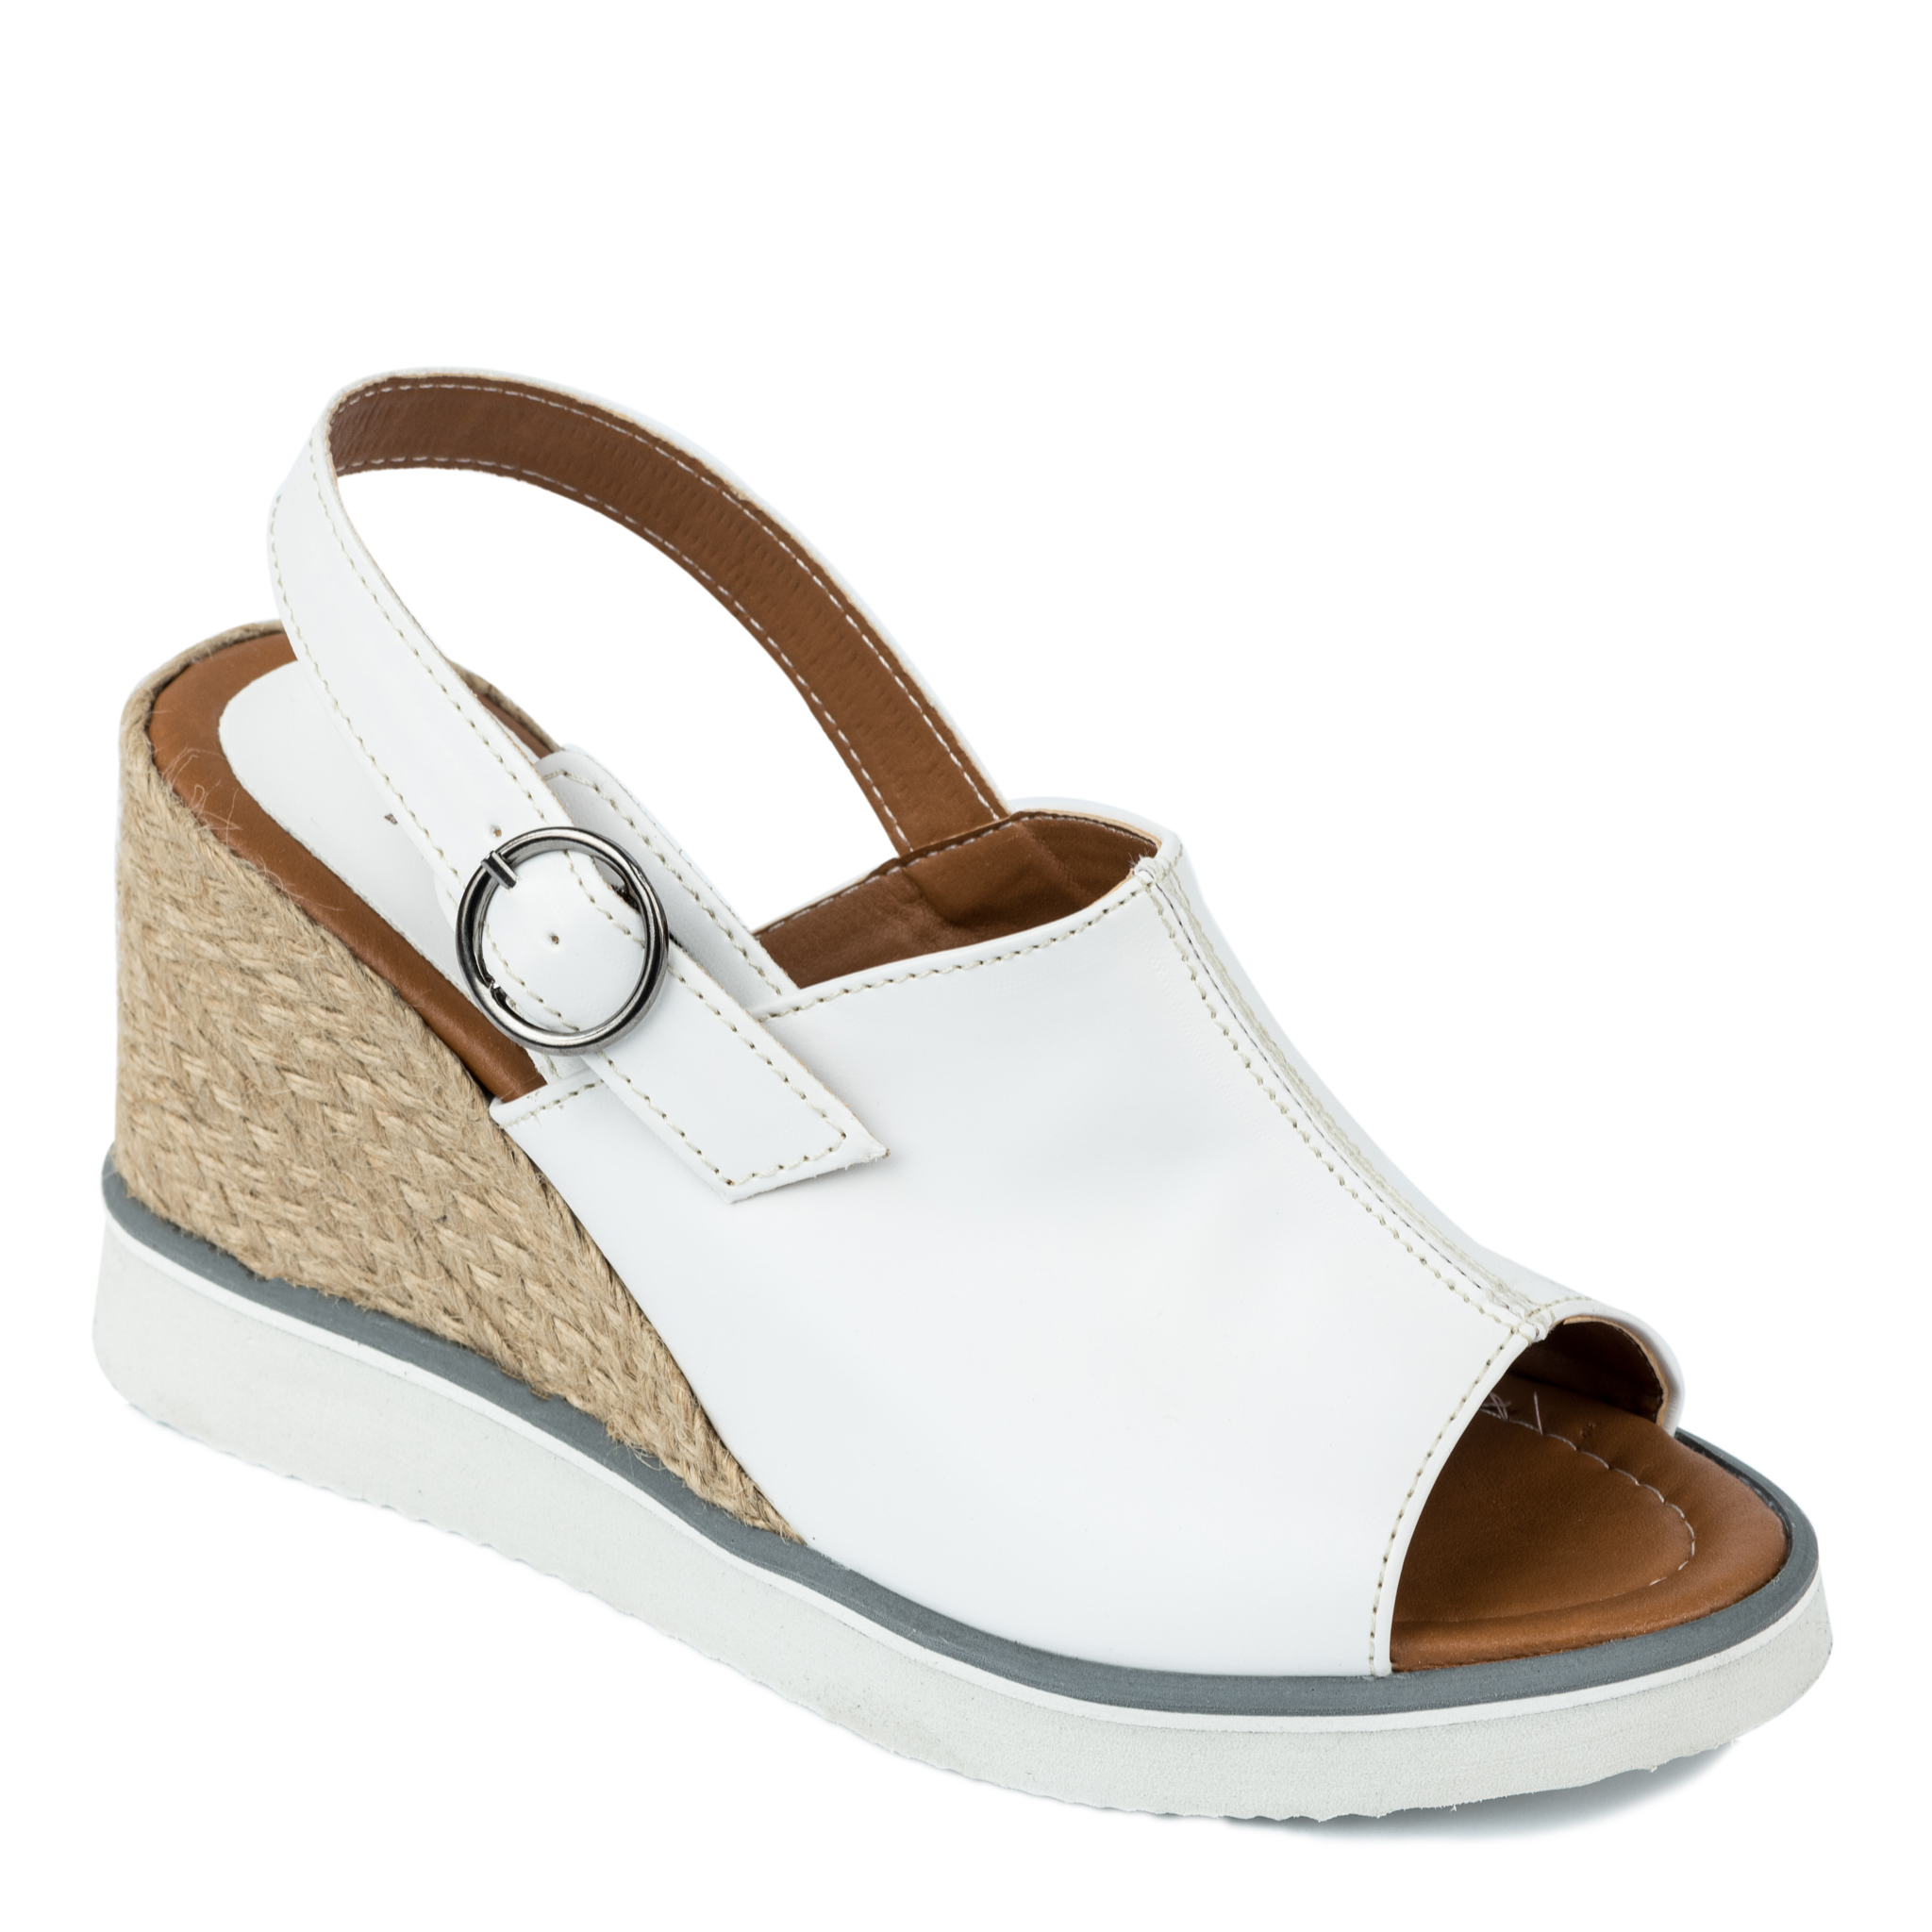 WEDGE SANDALS WITH JUTA AND SAW - WHITE